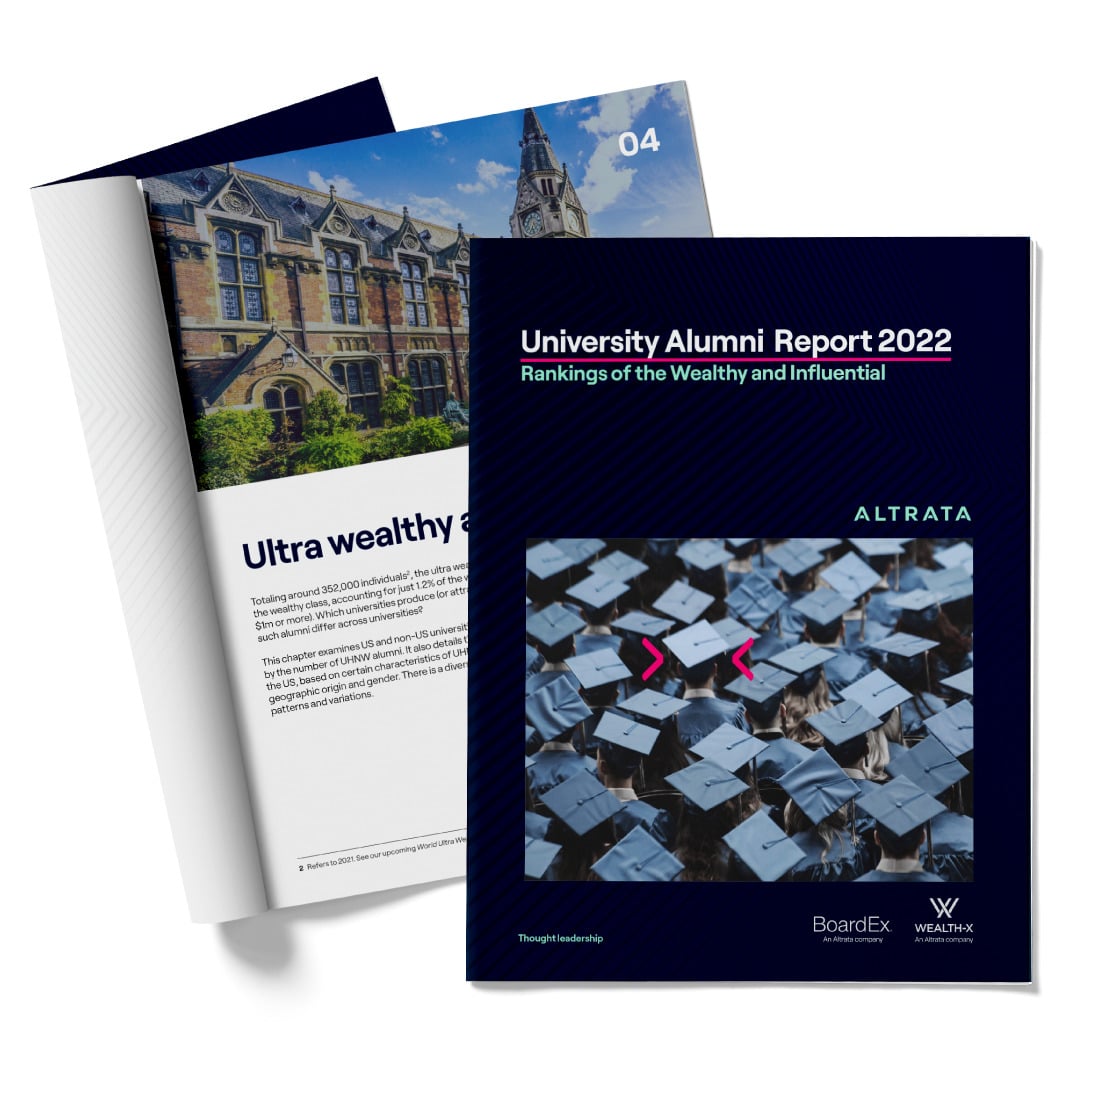 University Alumni Rankings of the Wealthy and Influential 2022